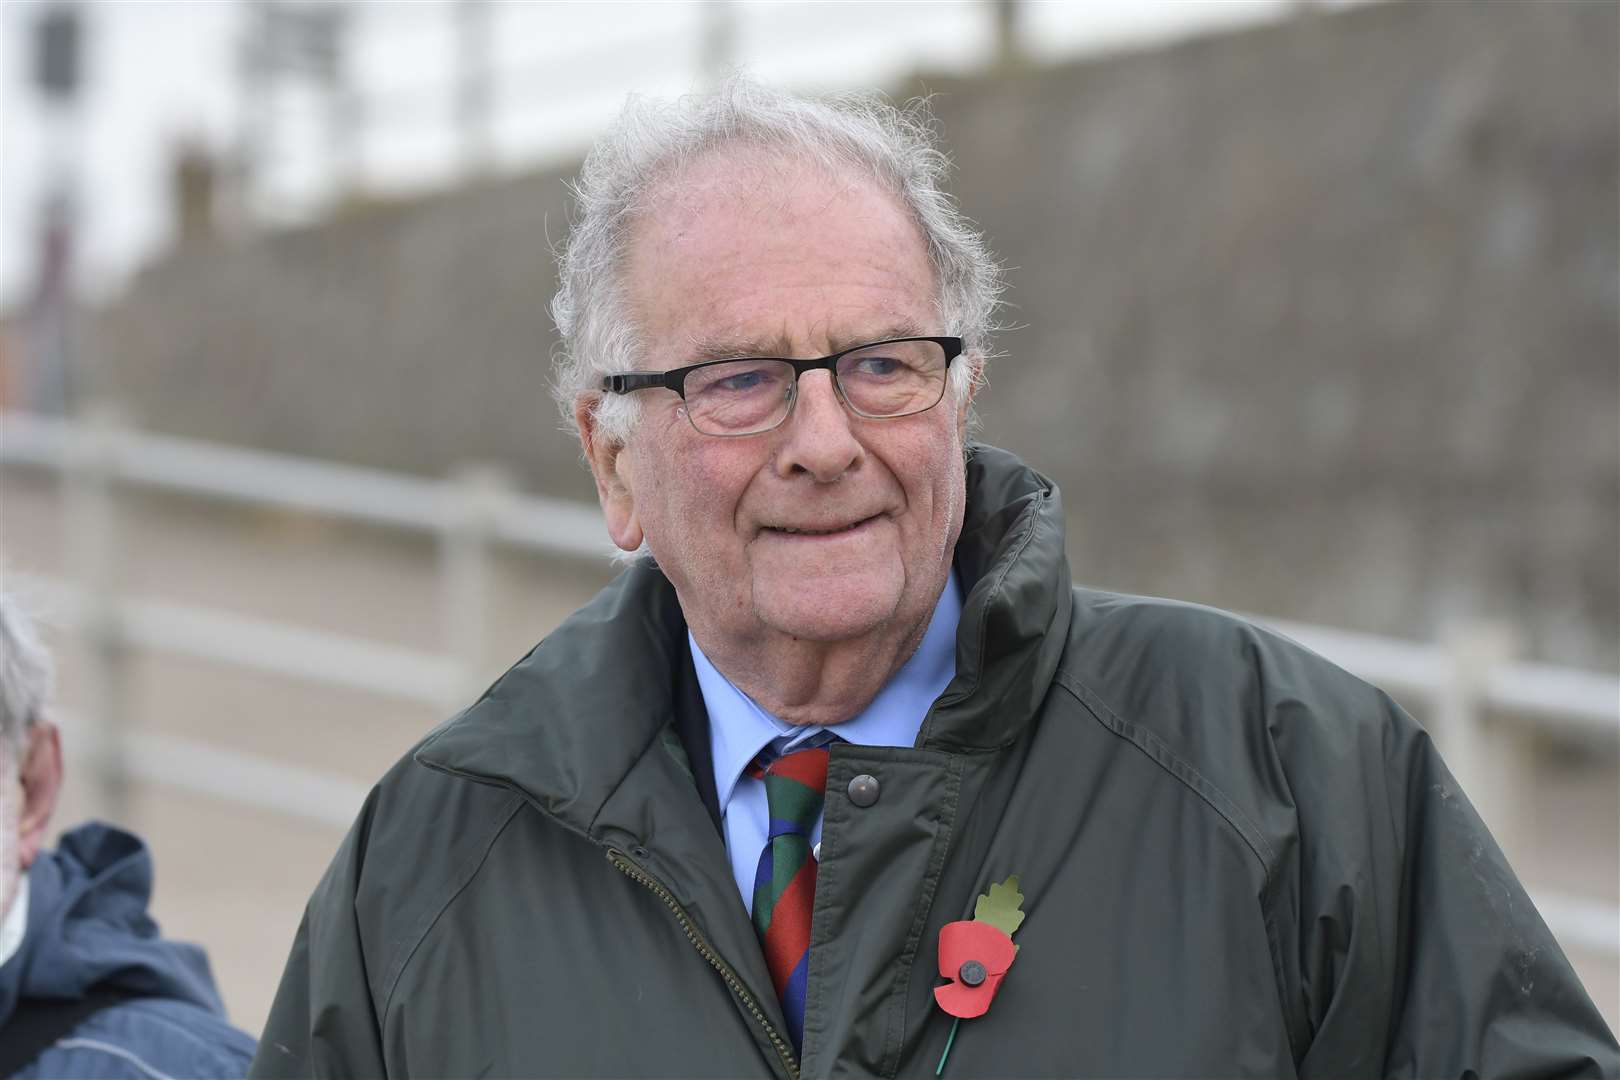 Herne Bay MP Roger Gale says he is “appalled” by our revelations